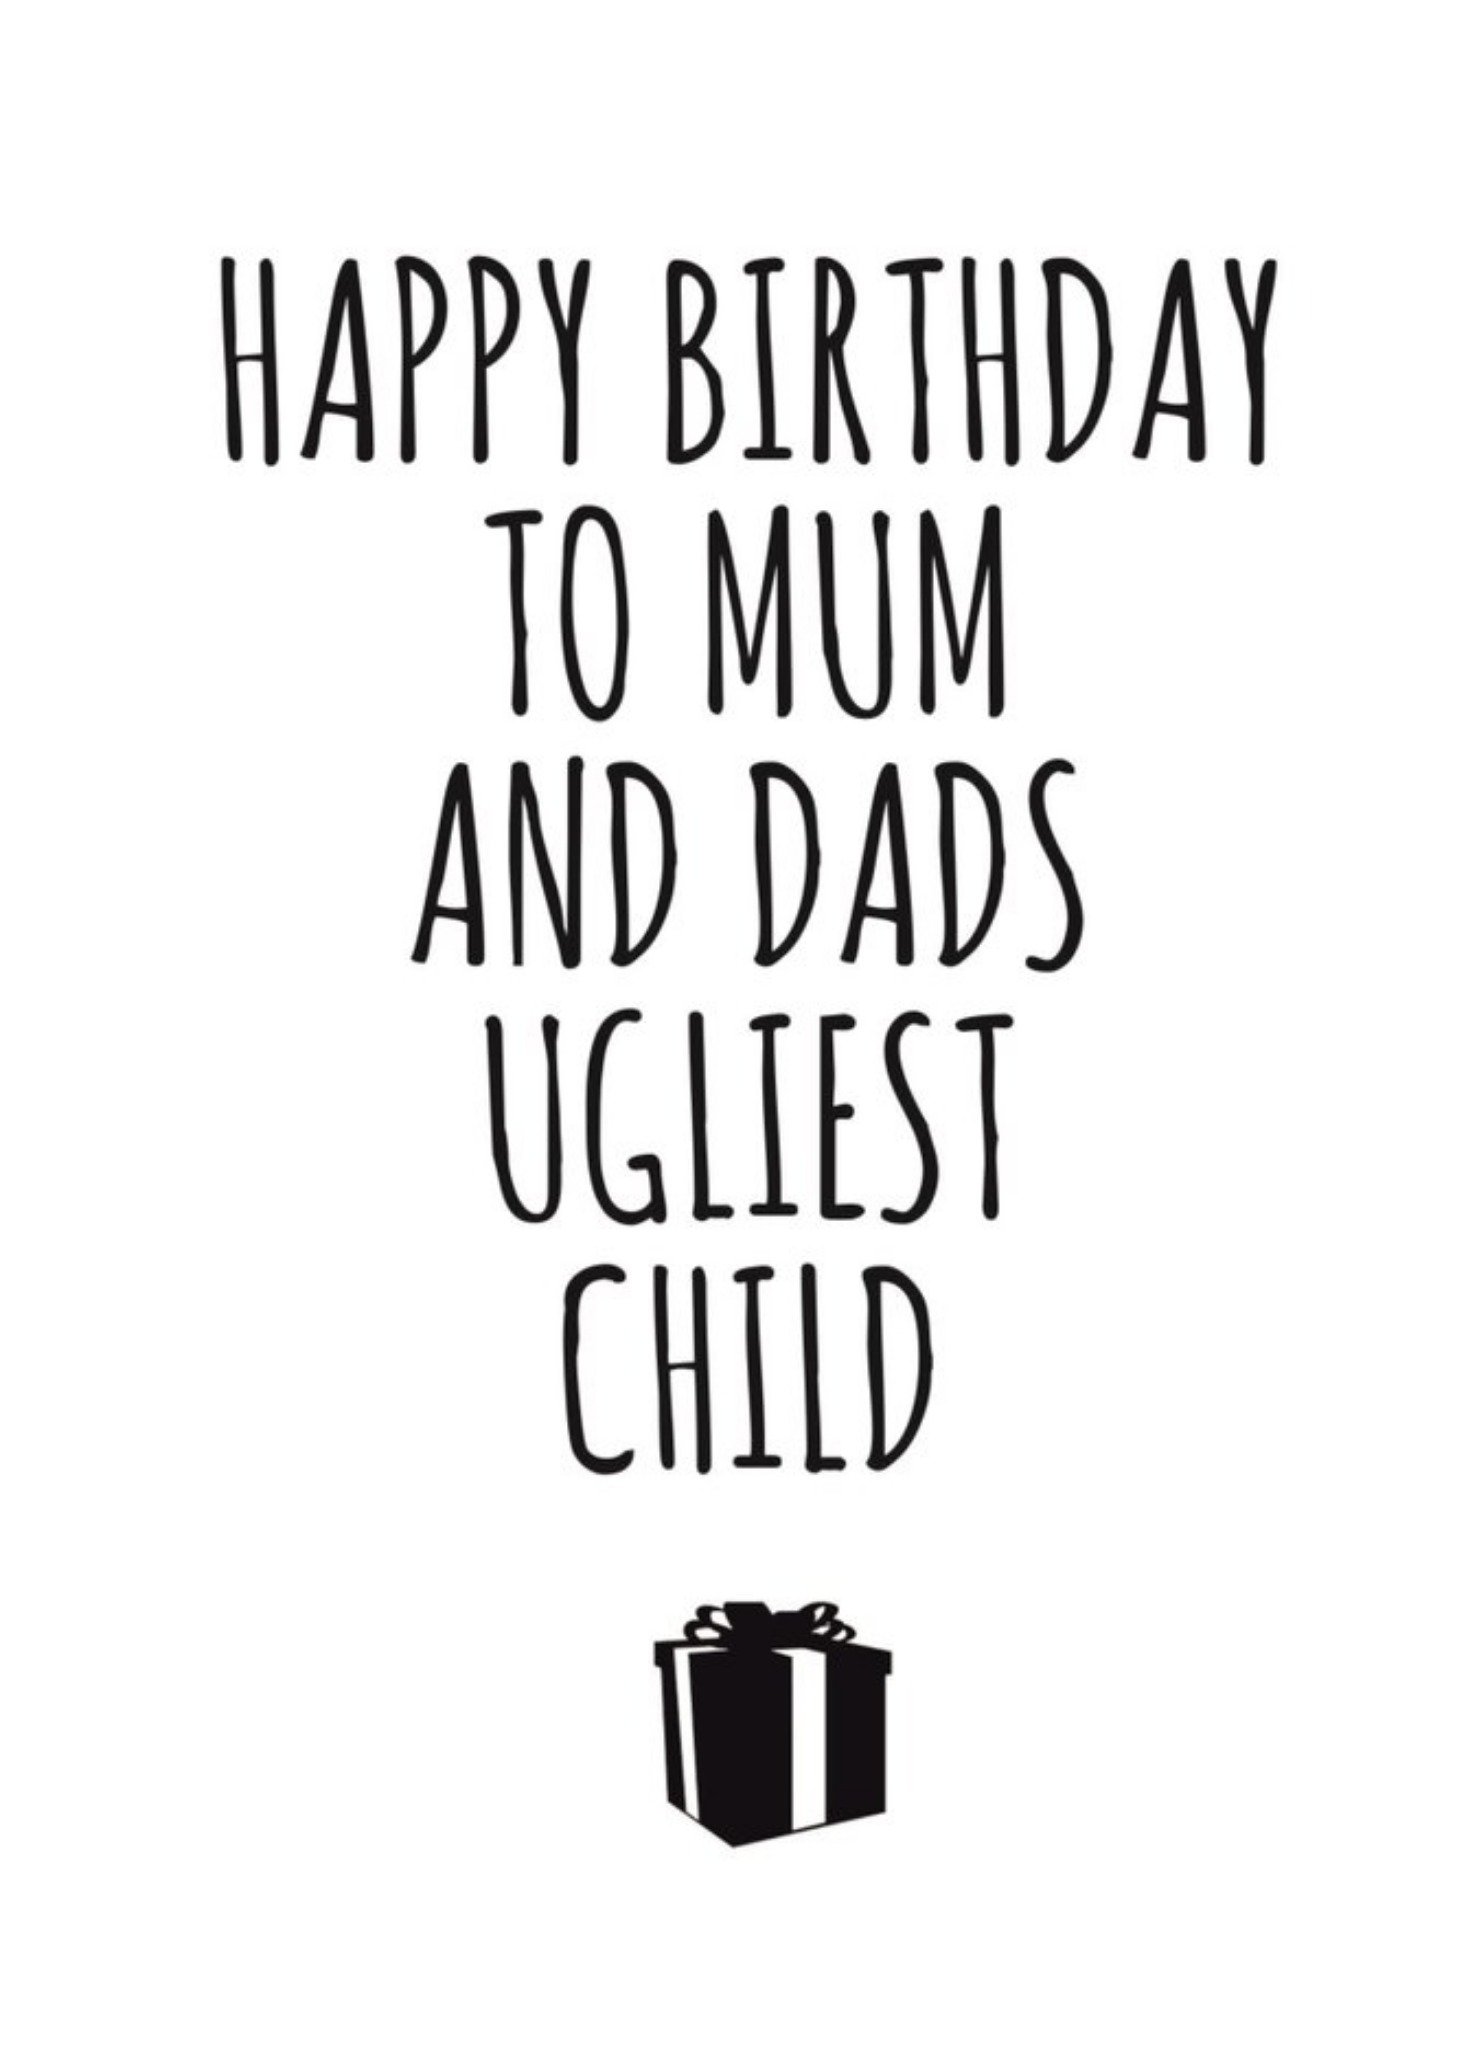 Banter King Typographical Funny Happy Birthday To Mum And Dads Ugliest Child Card, Large